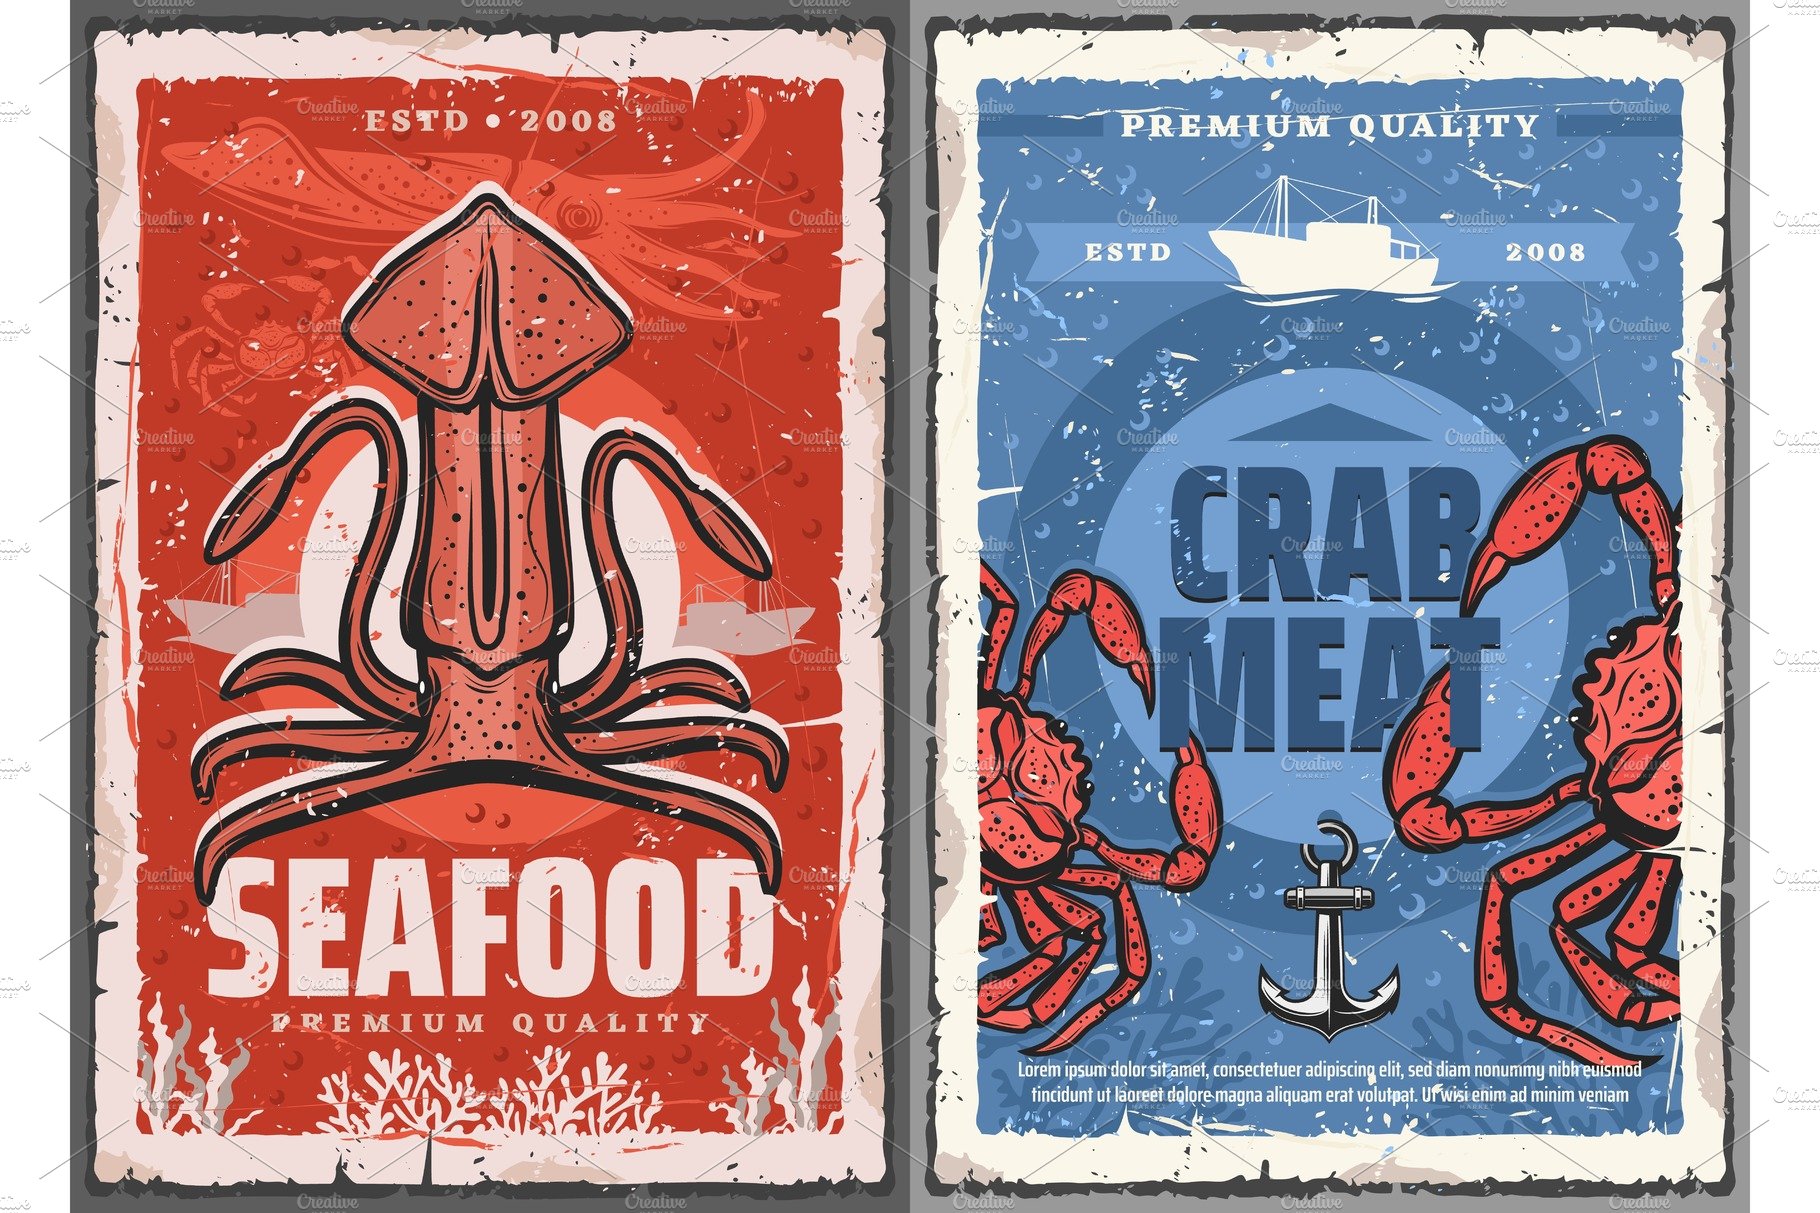 Seafood squid and crab meat cover image.